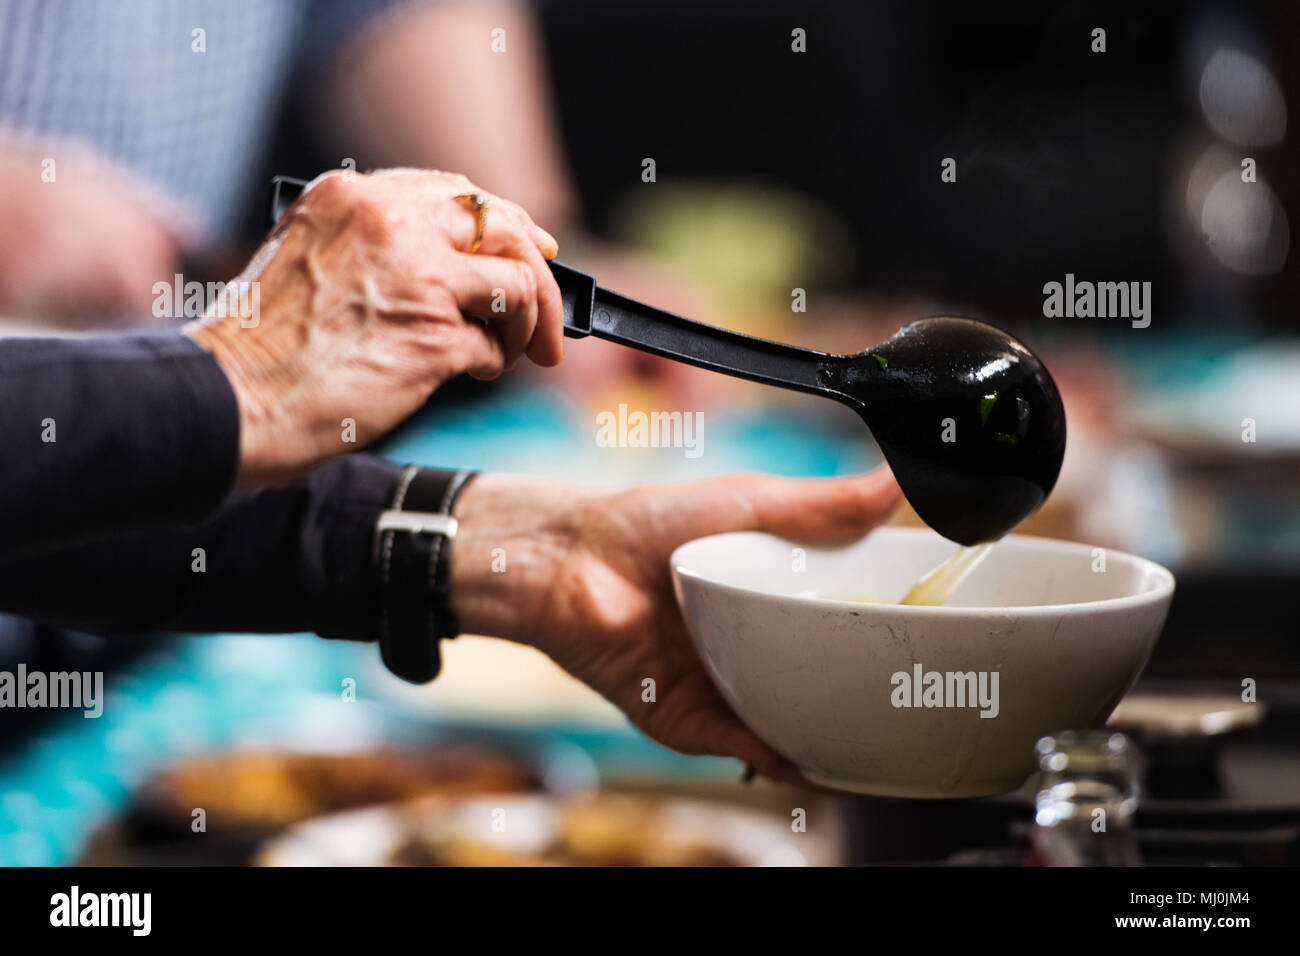 Hands ladling soup into a bowl Stock Photo